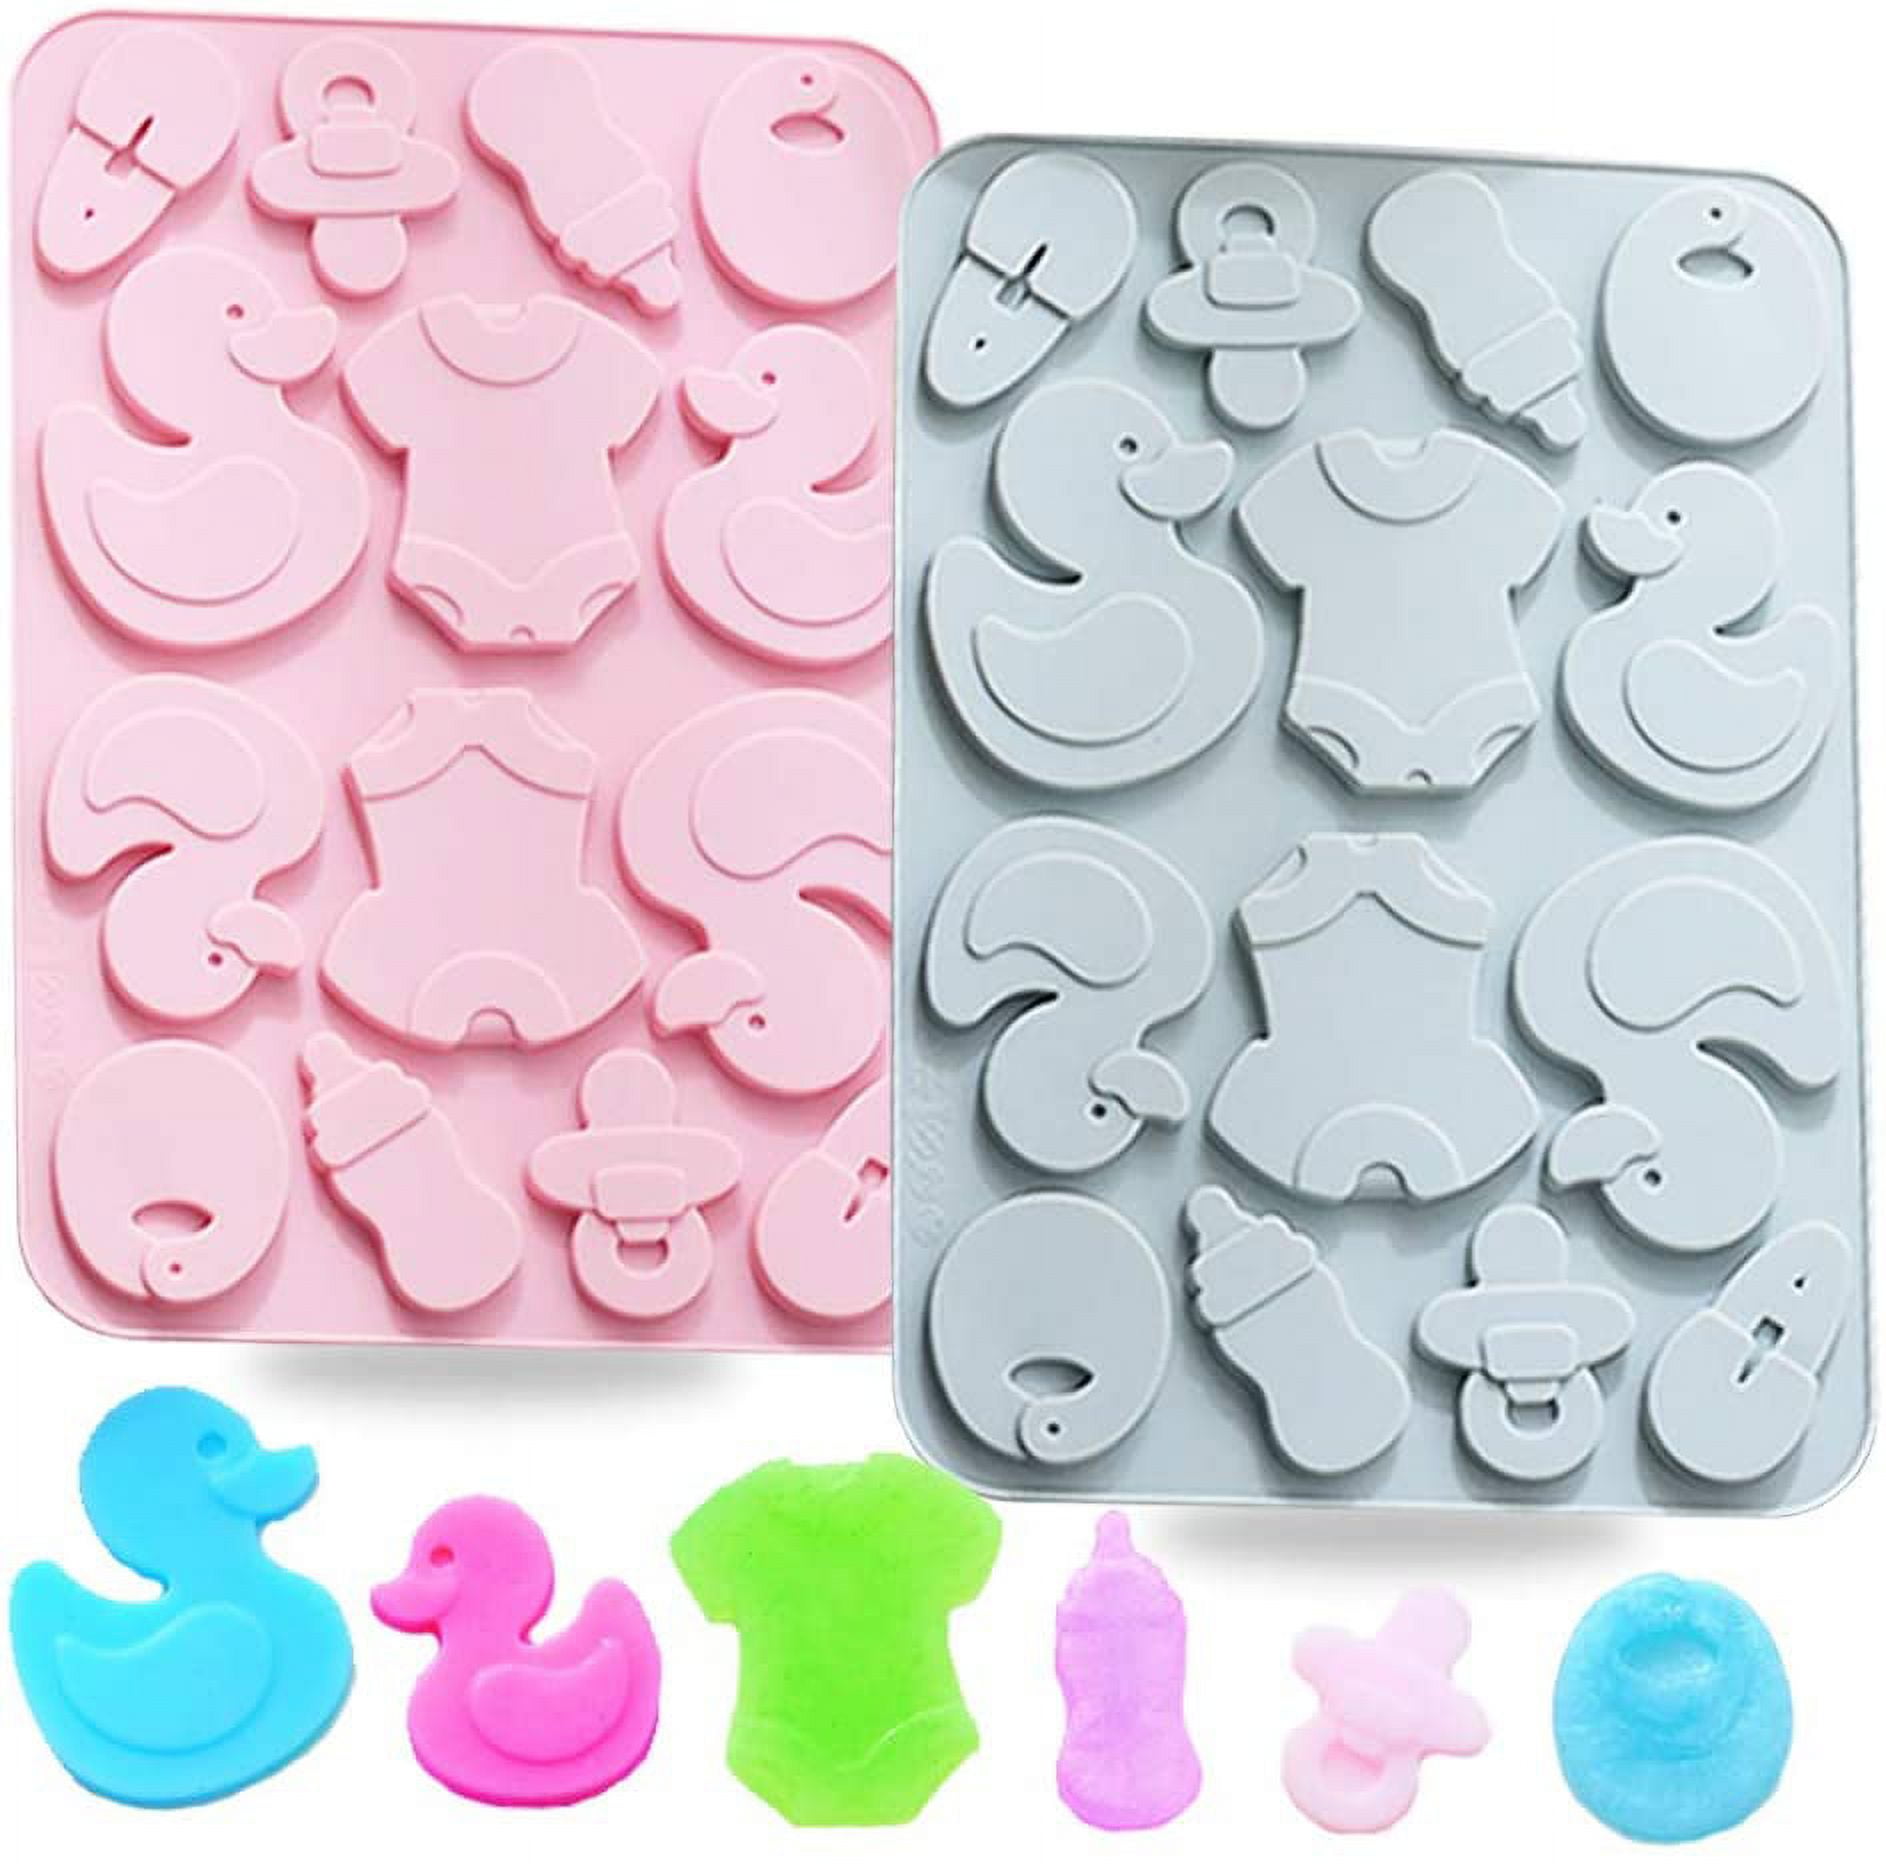 Llama FRESHIE Mold - 3D Model Molding for Making Silicone Mould